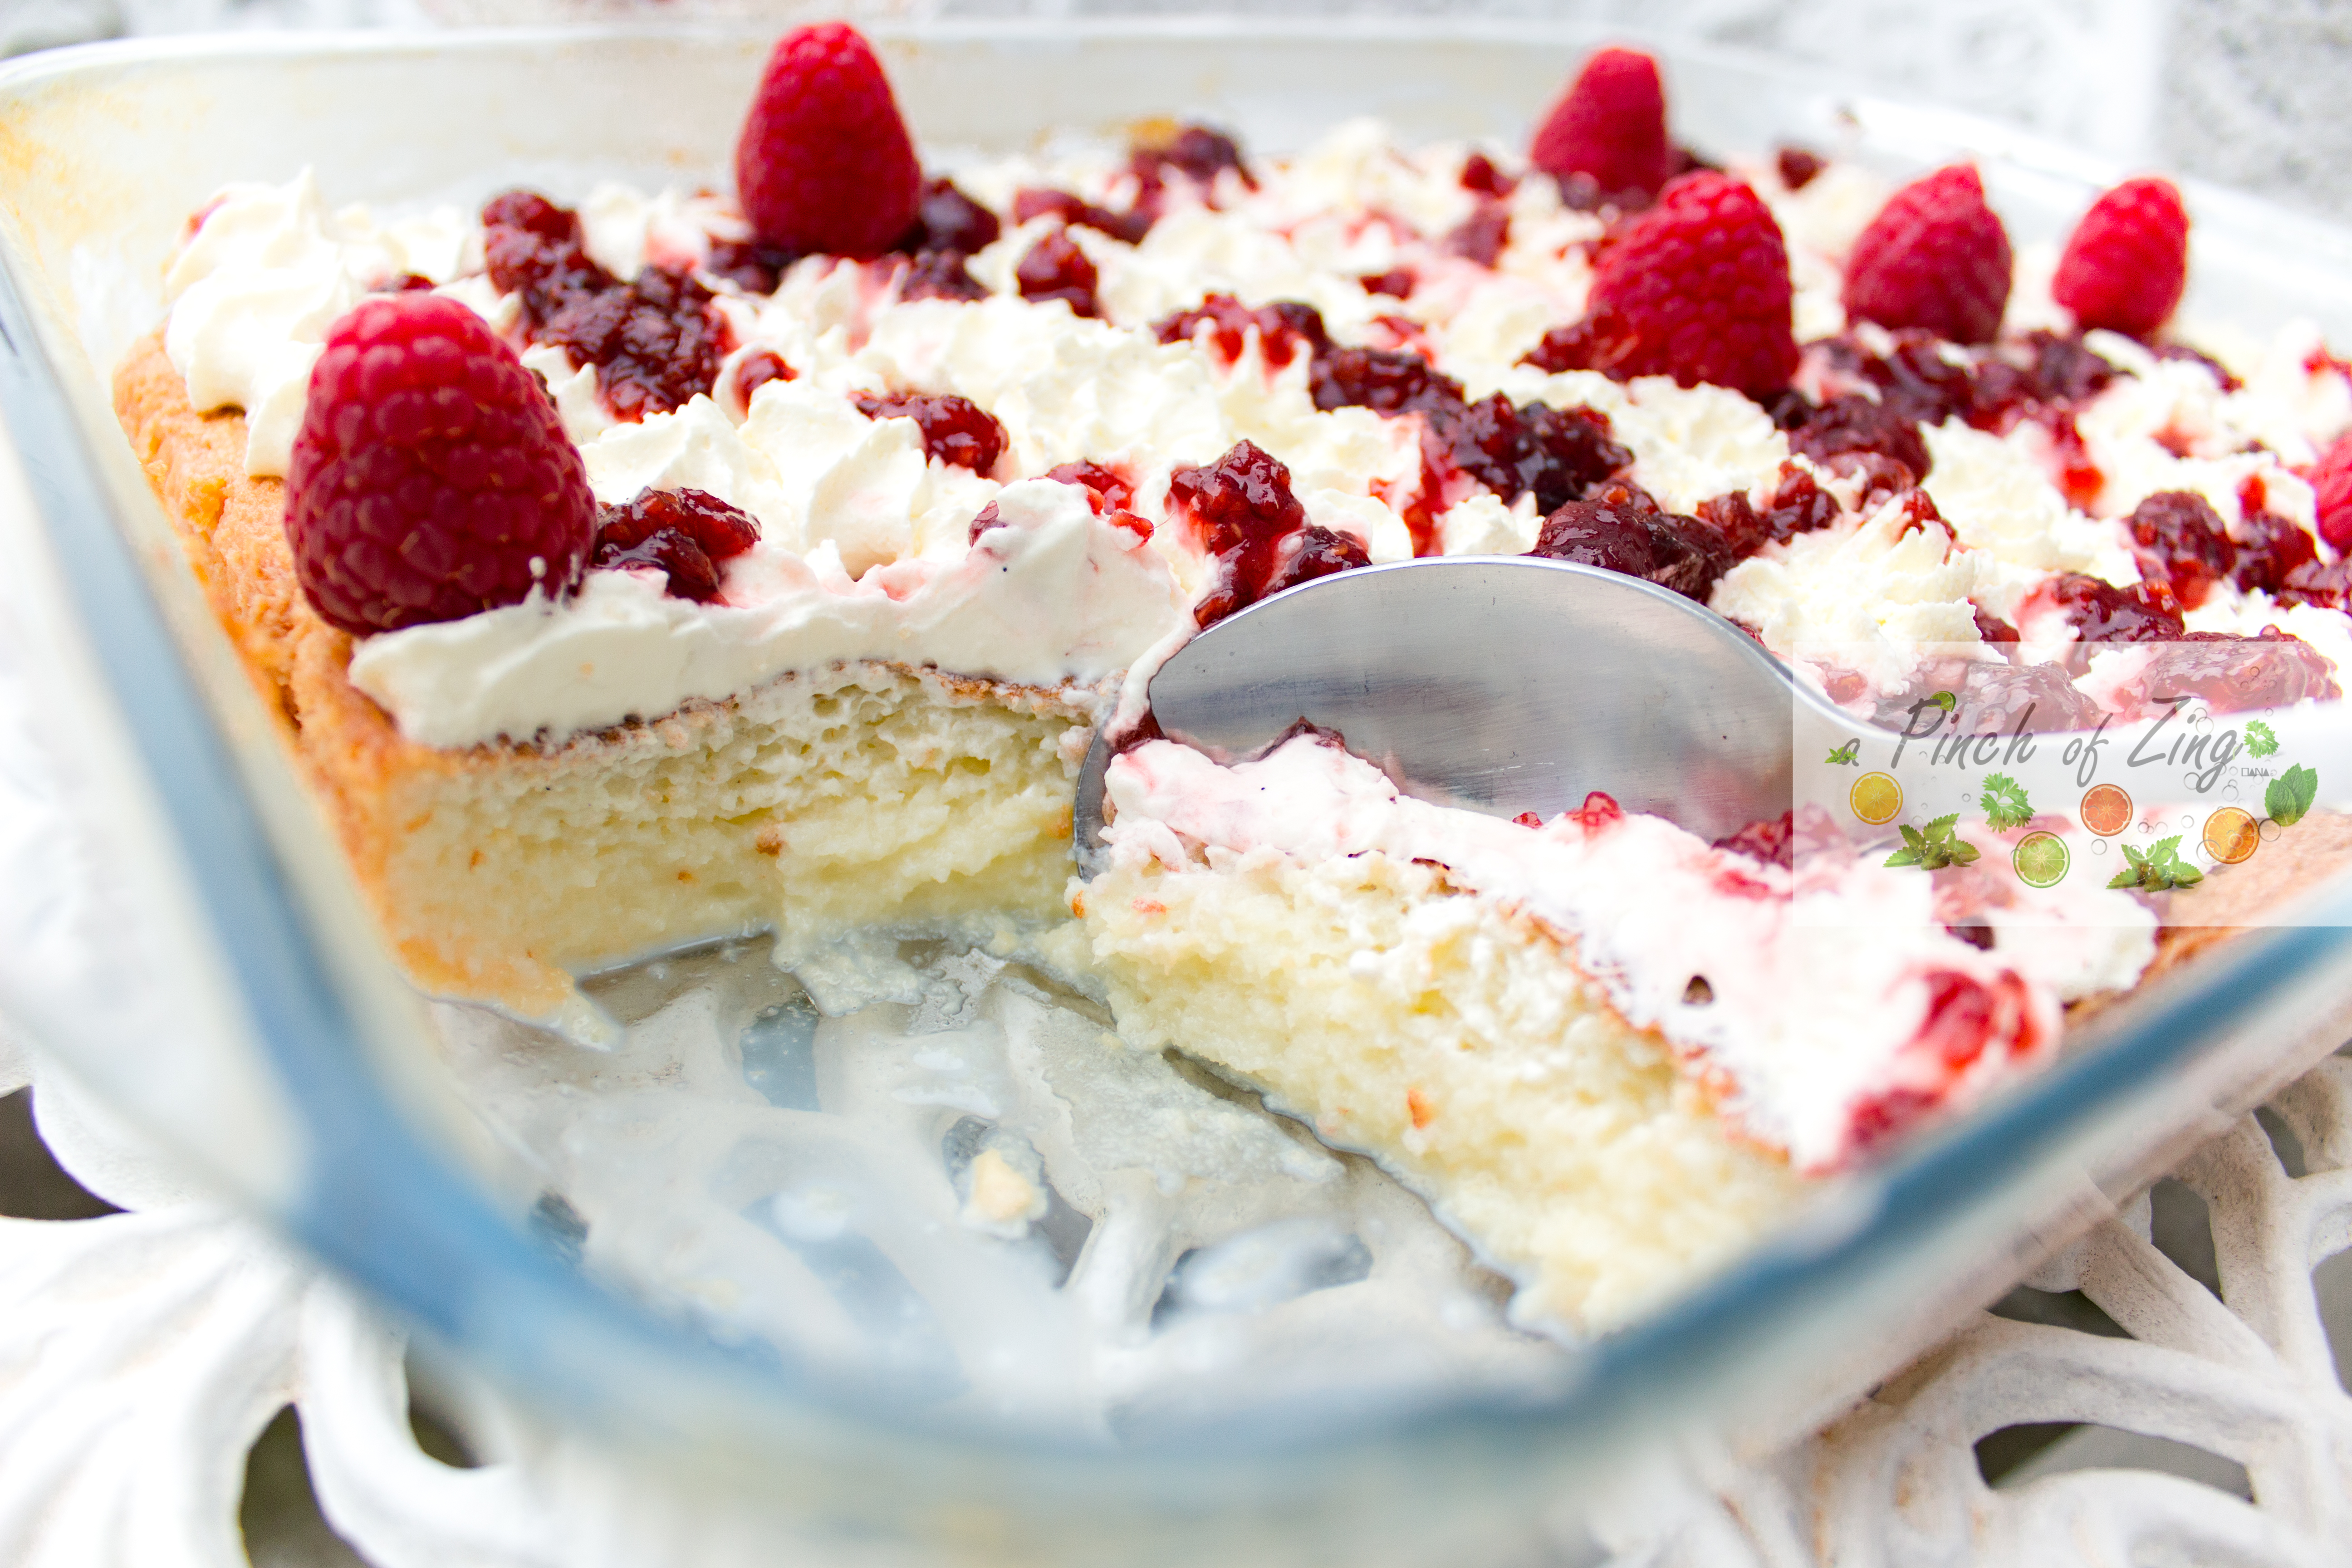 Milk cake with Chantilly cream and raspberries